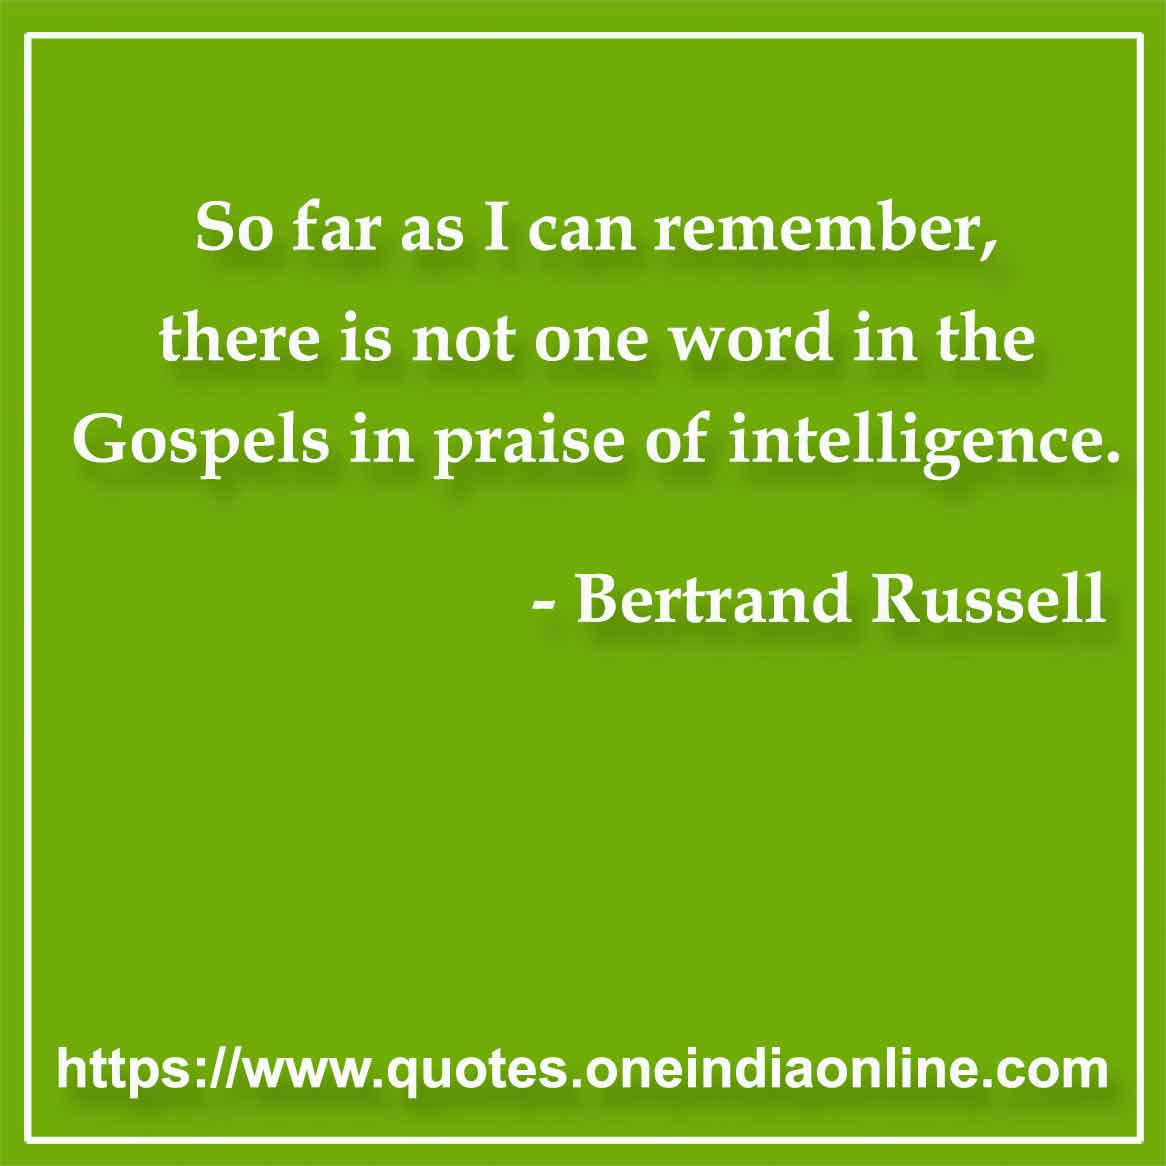 So far as I can remember, there is not one word in the Gospels in praise of intelligence. 

- Intelligent Quotes by Bertrand Russell